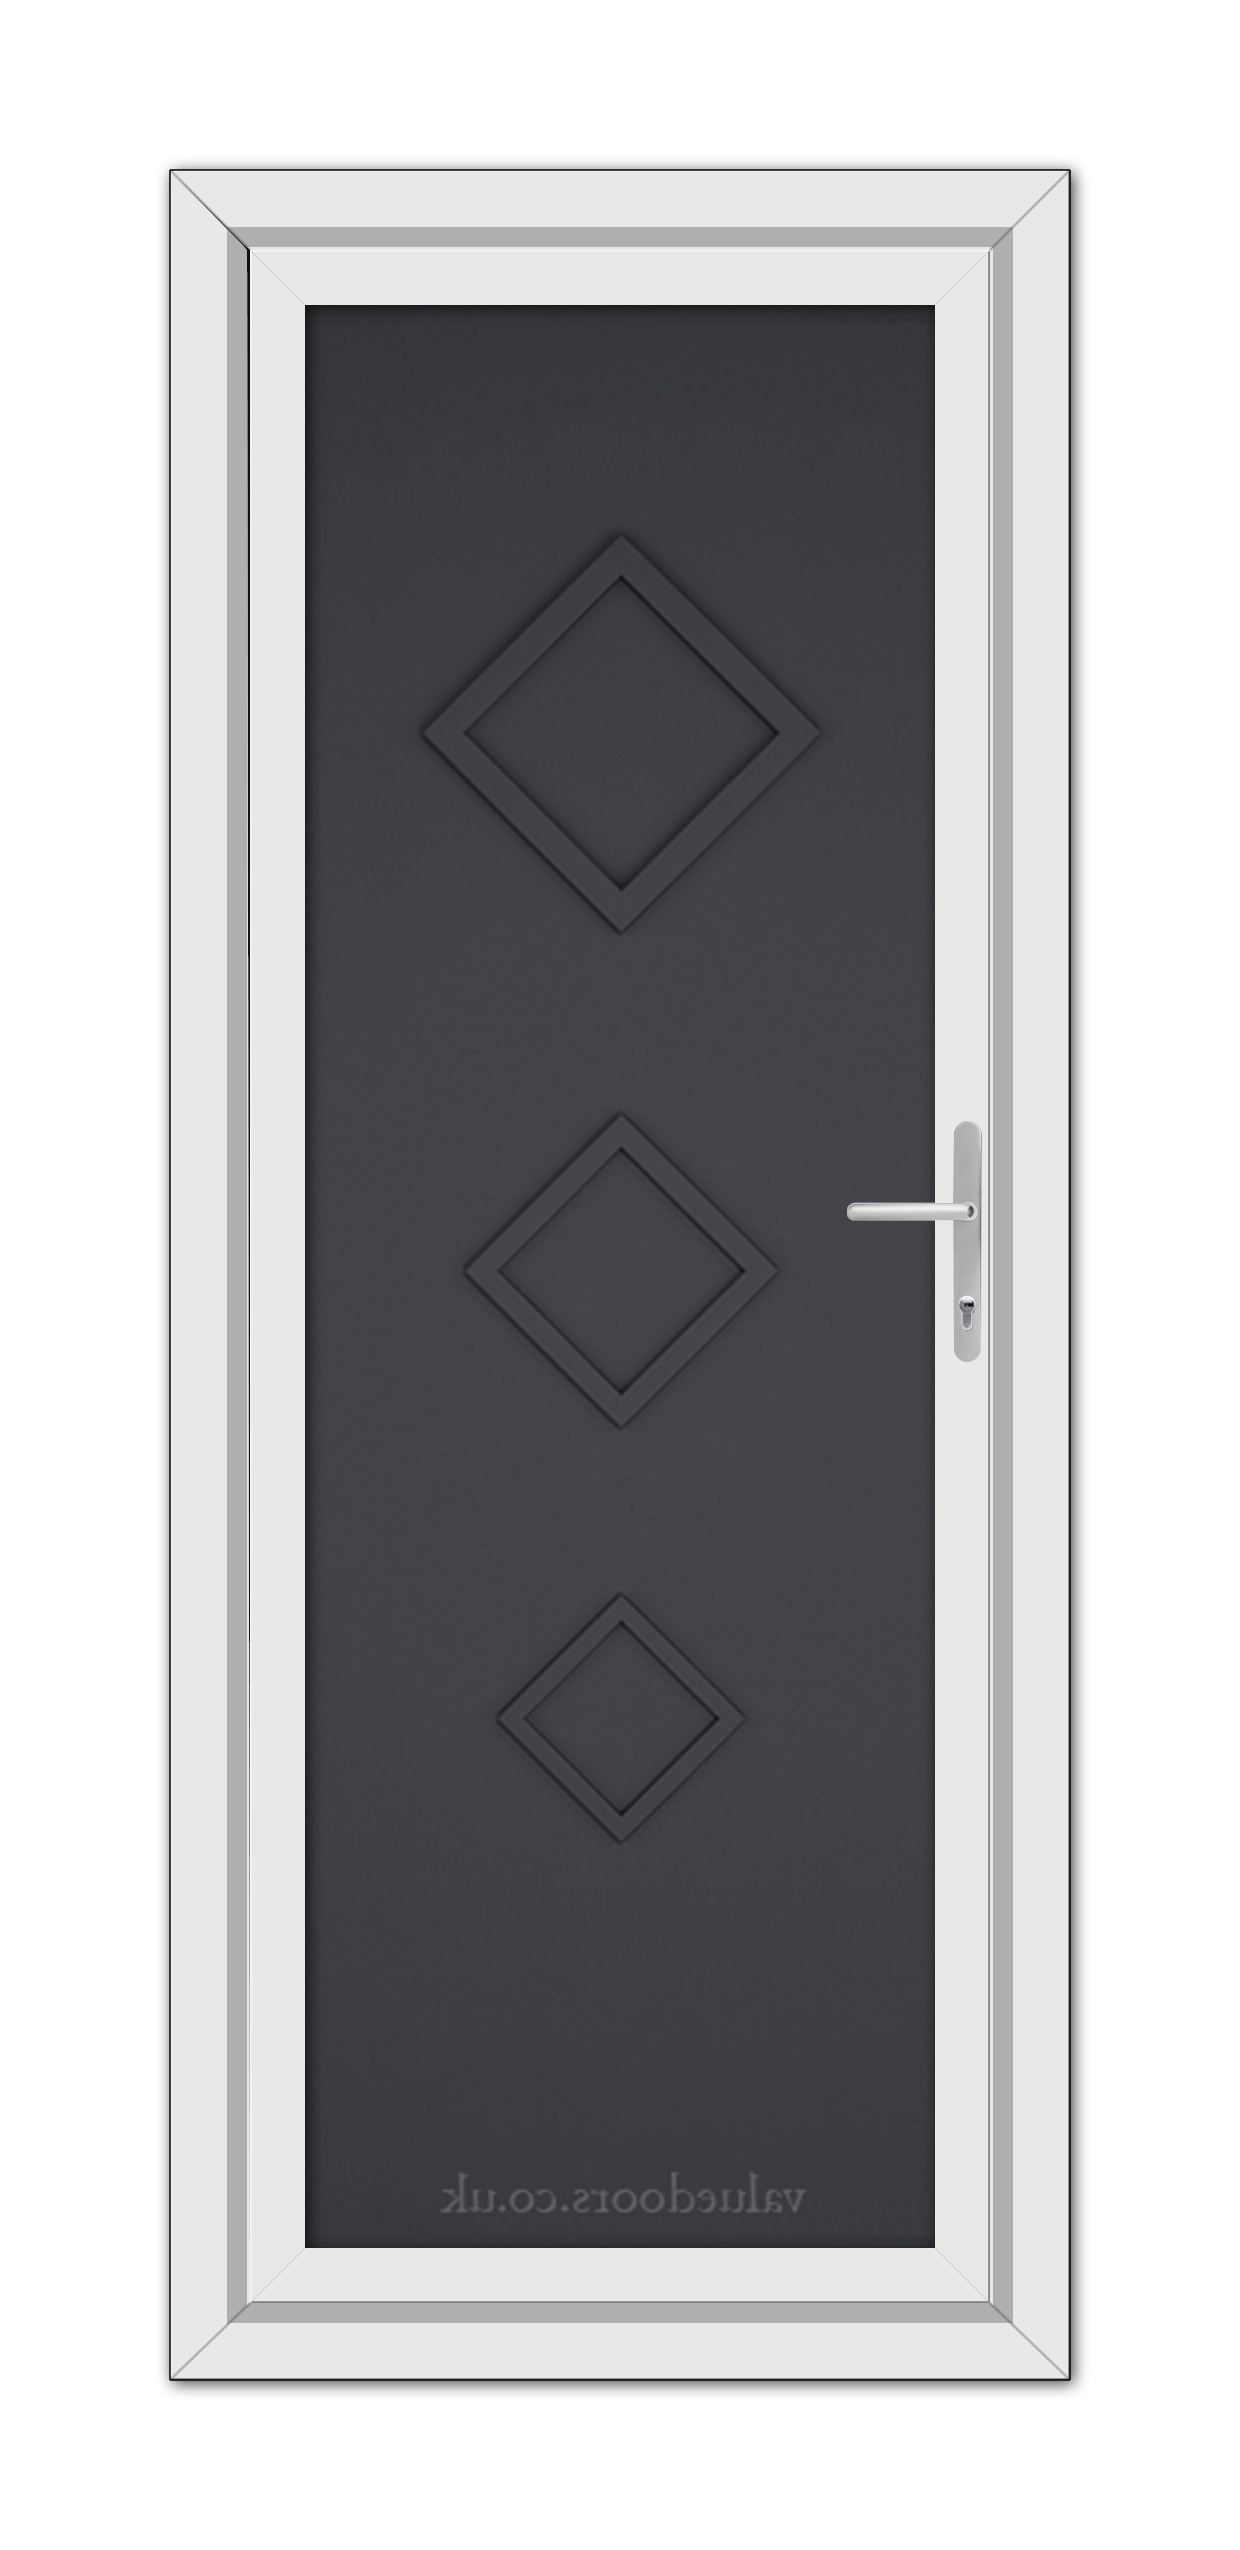 A Grey Modern 5123 Solid uPVC door with three diamond-shaped panels, featuring a white frame and a chrome handle, isolated on a white background.